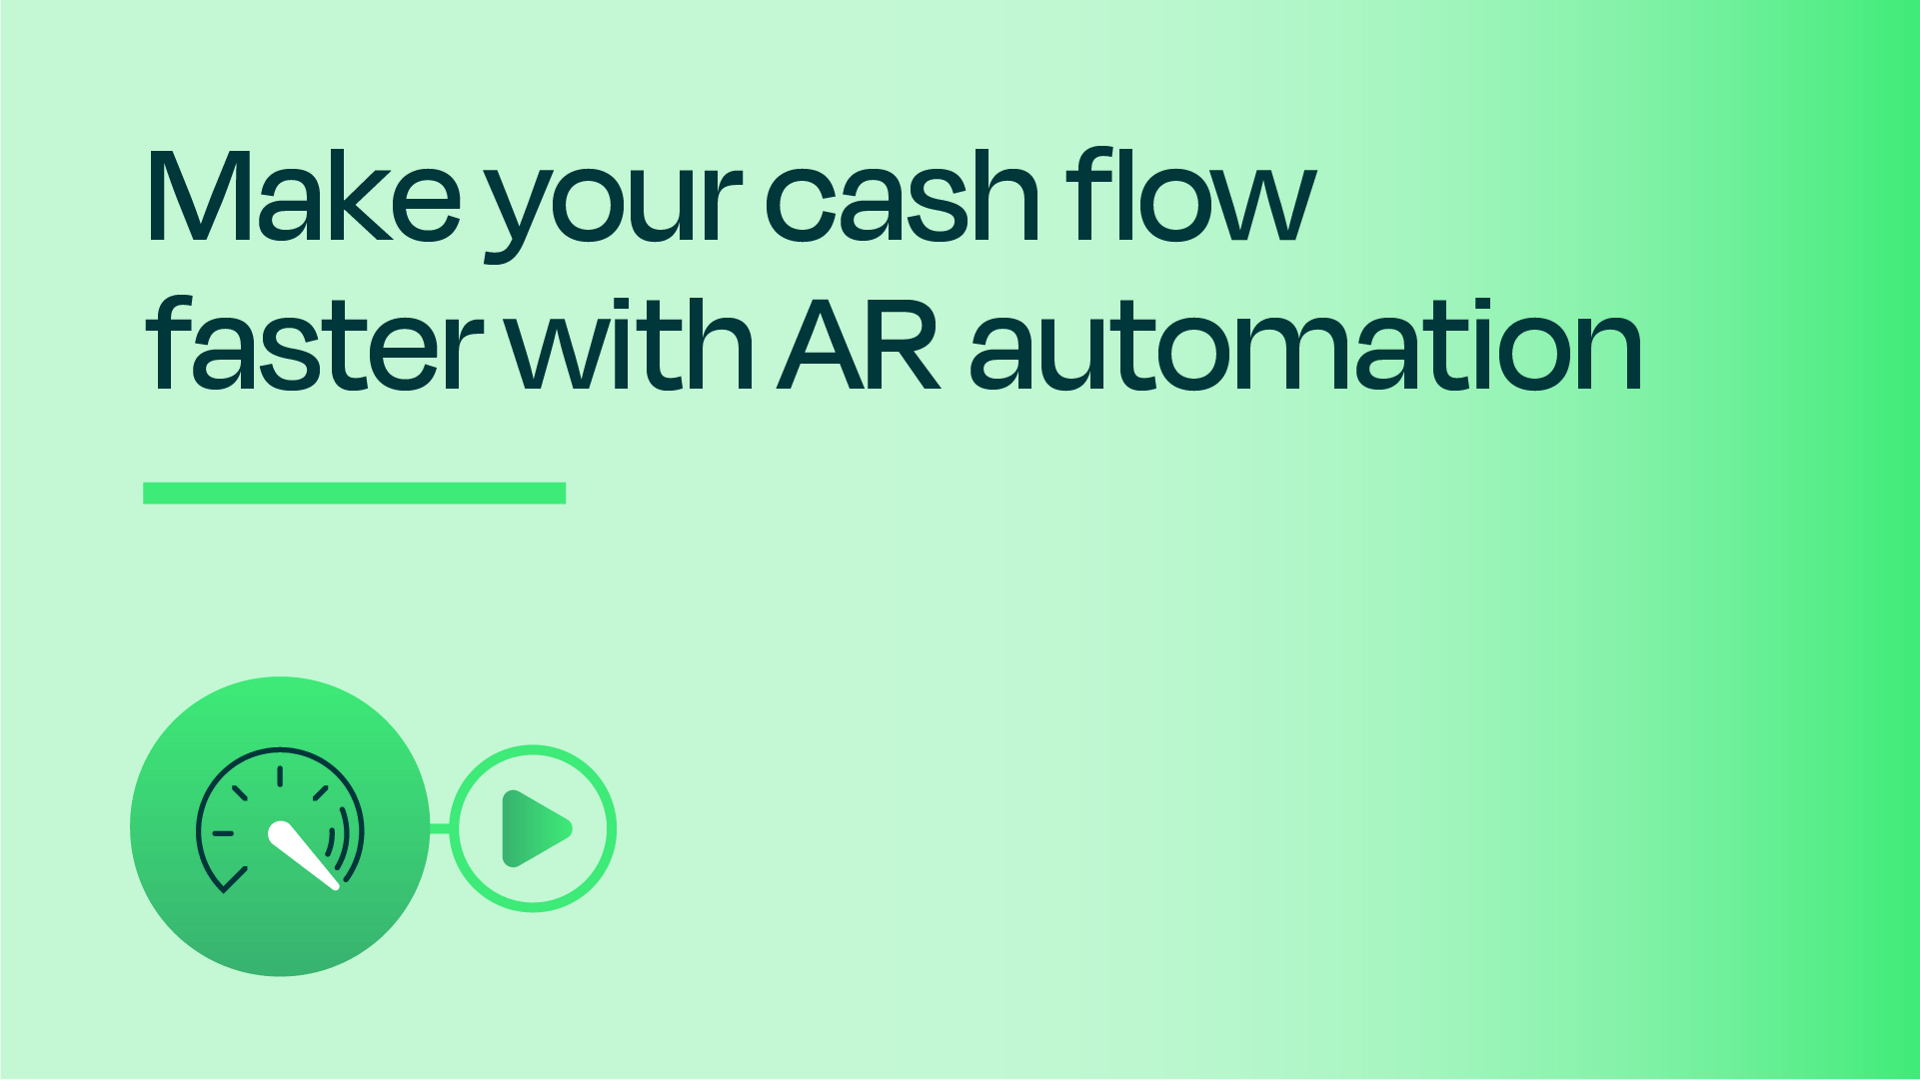 Make your cash flow faster with AR automation